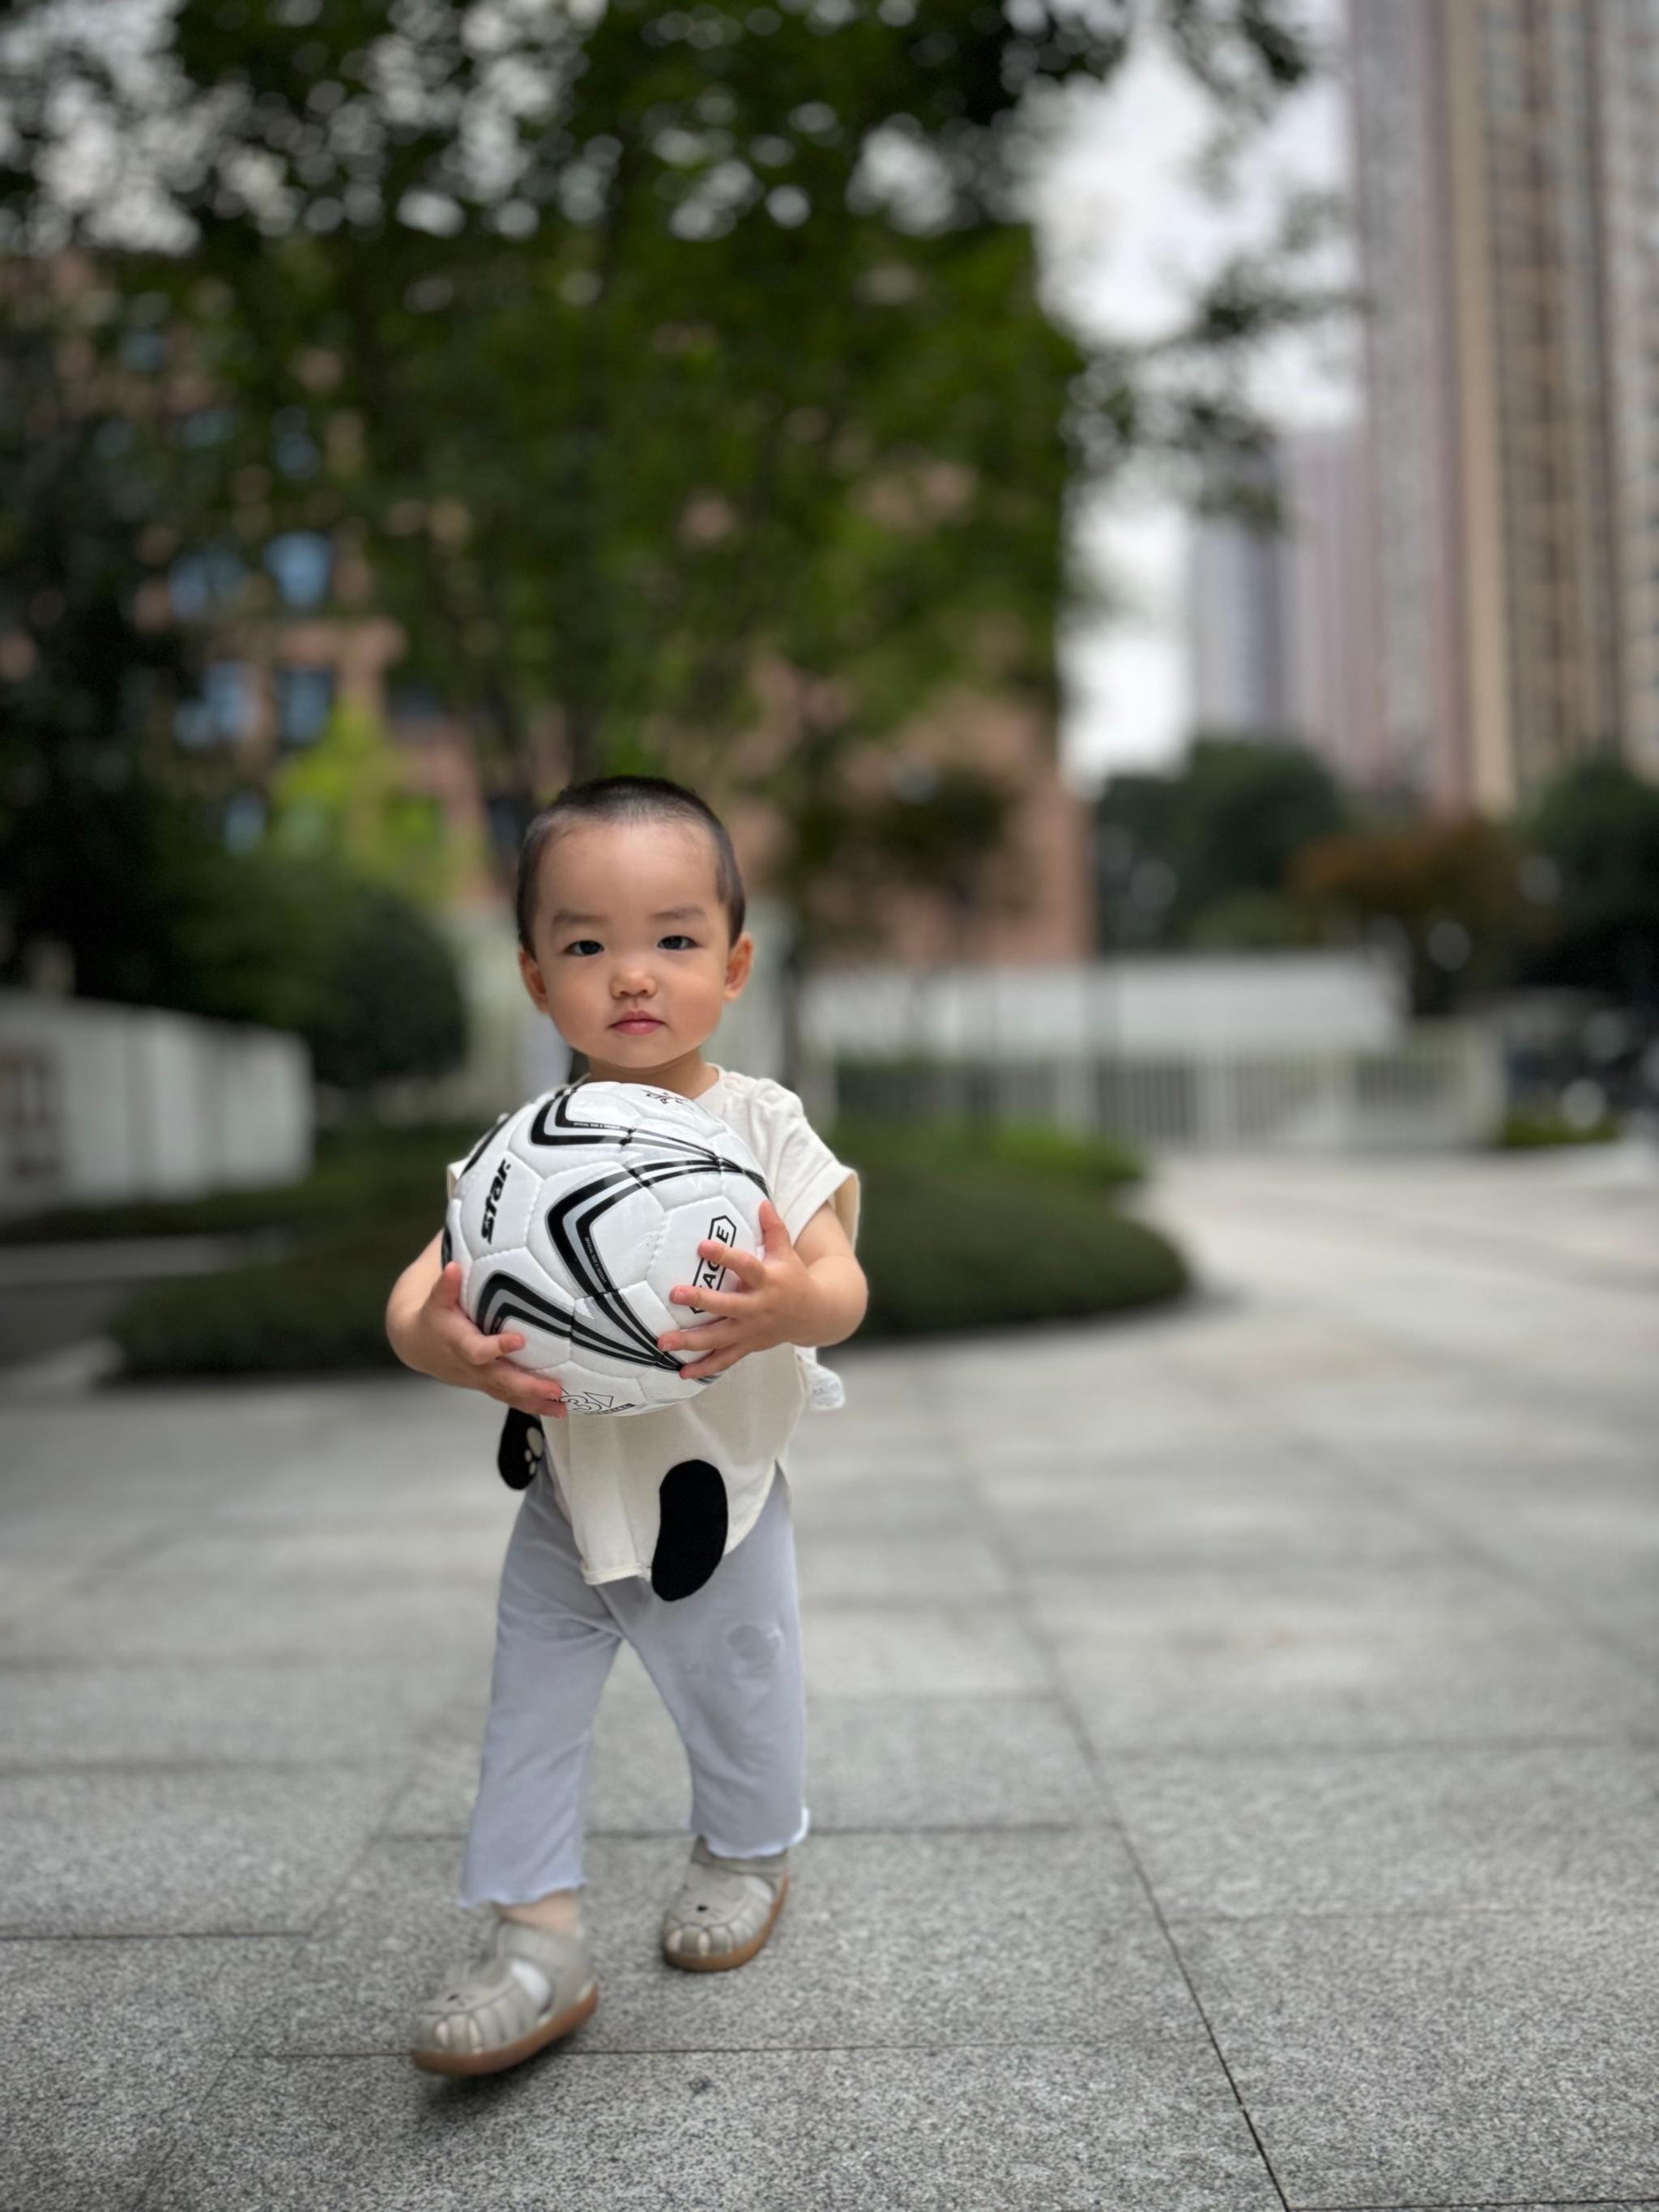 A young child holding a soccer ball stands on a paved area with trees and buildings in the background